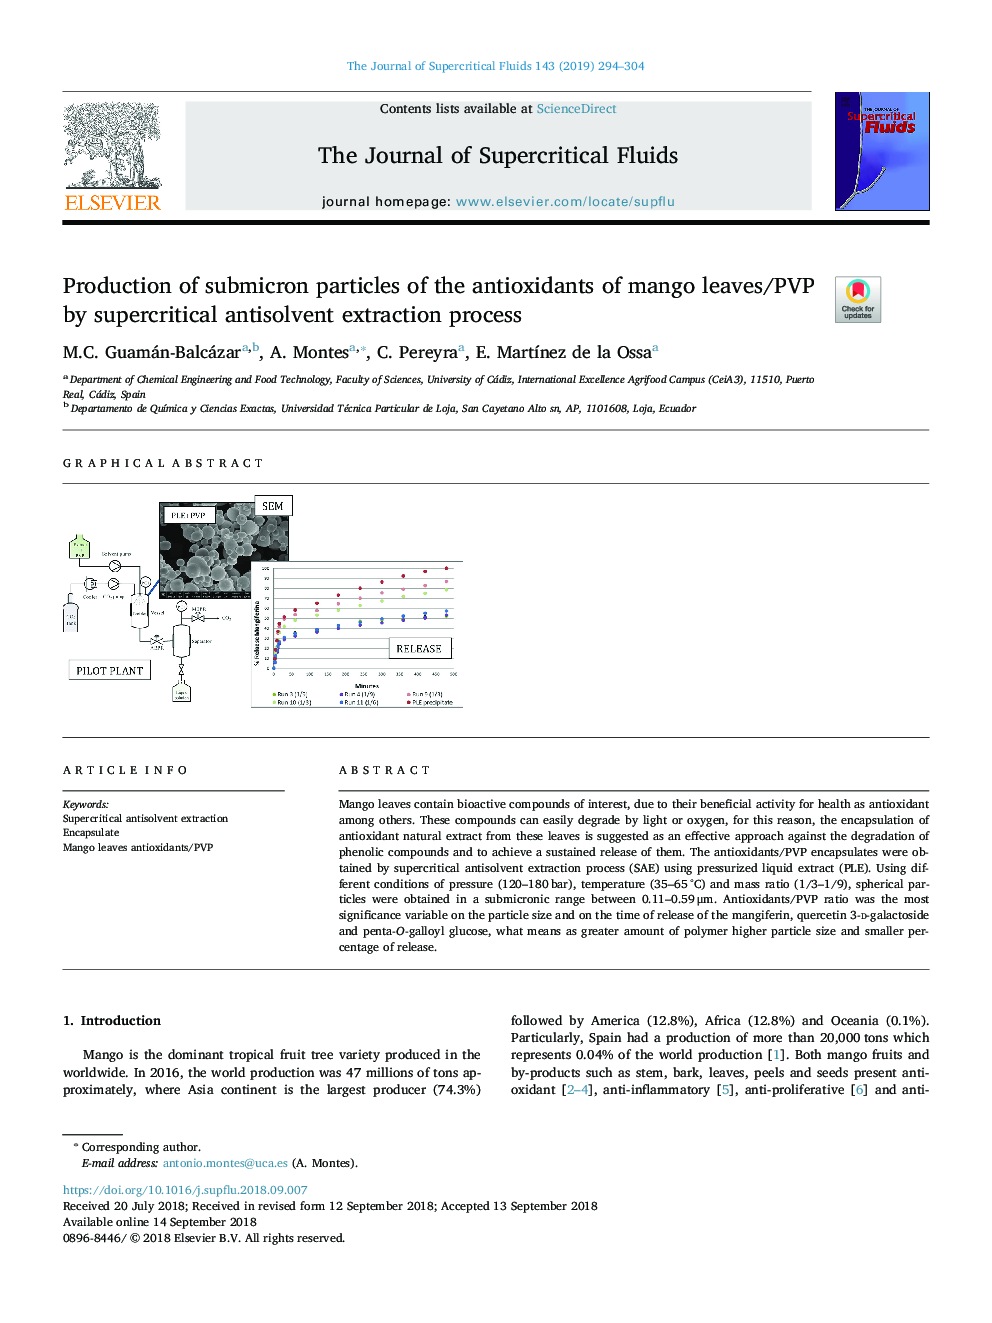 Production of submicron particles of the antioxidants of mango leaves/PVP by supercritical antisolvent extraction process